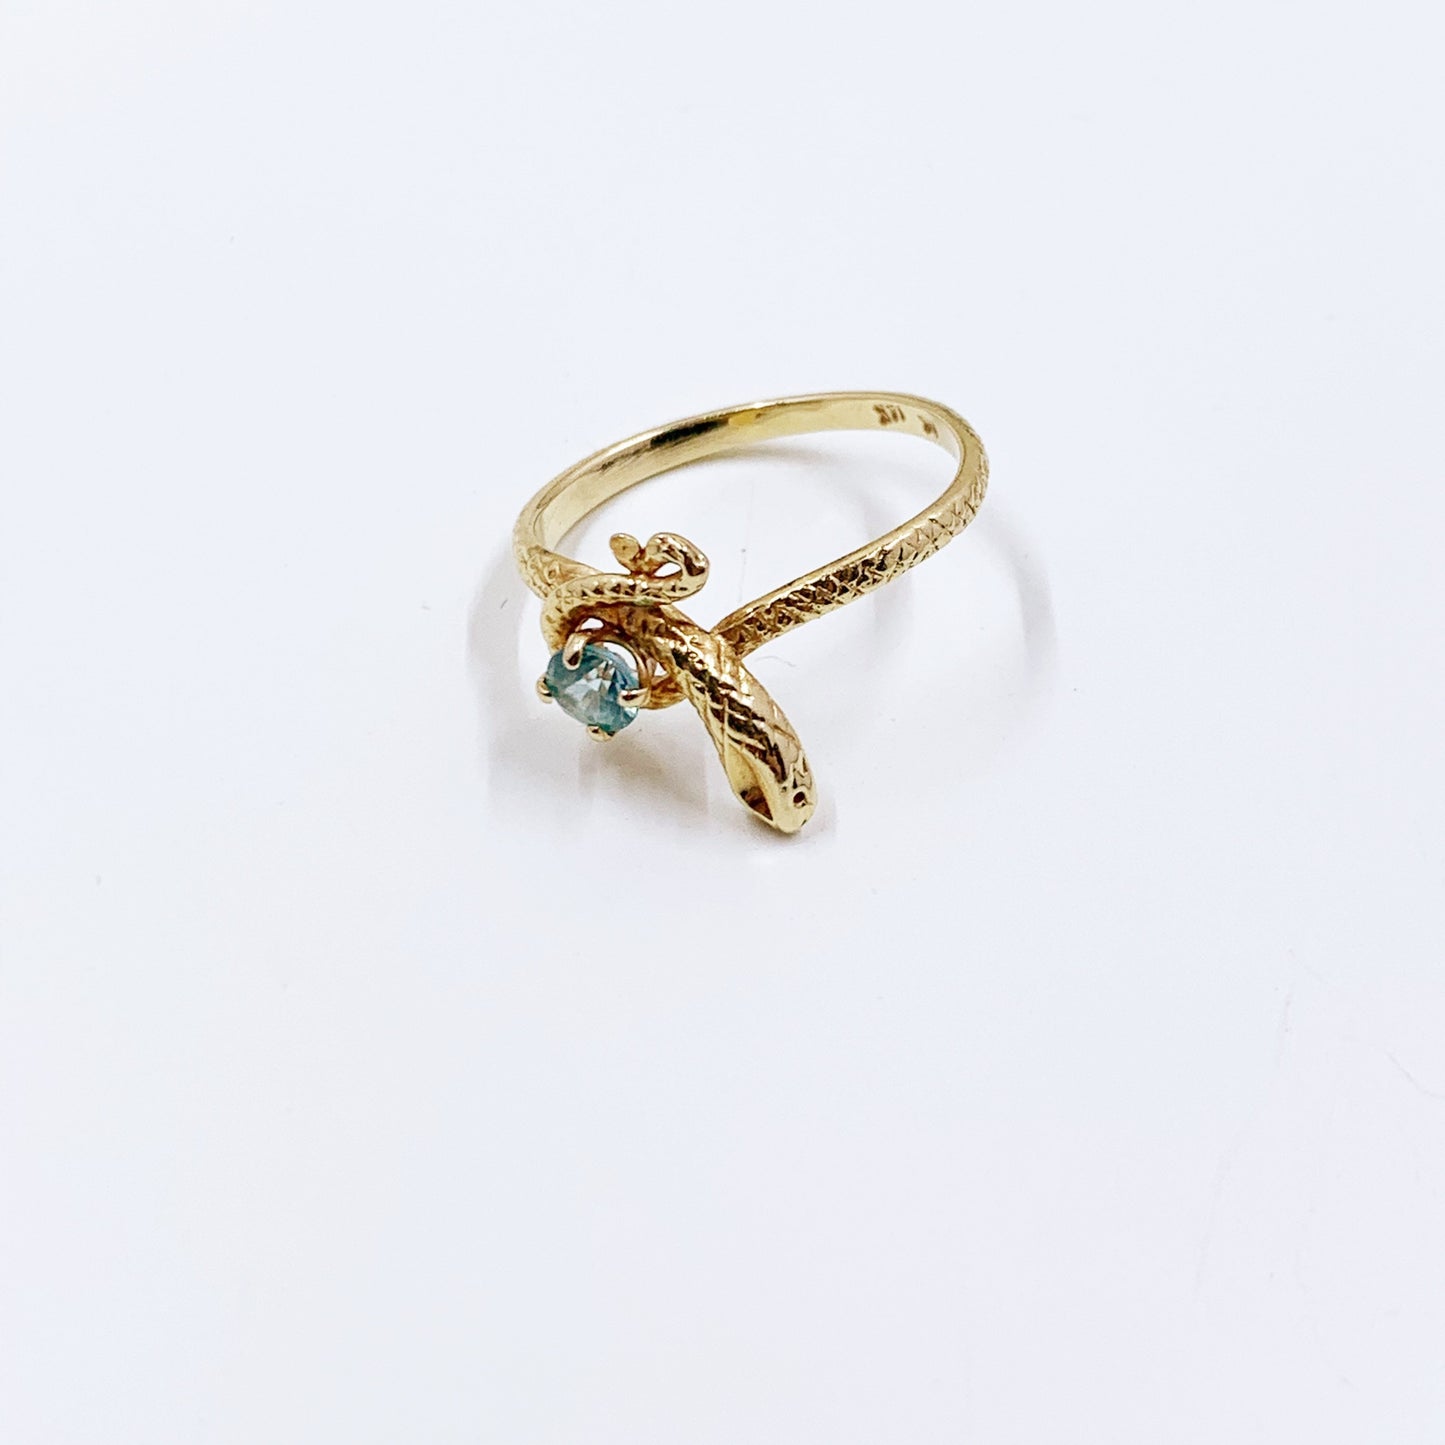 Vintage 14K Gold and Zircon Coiled Snake Ring | Size 7